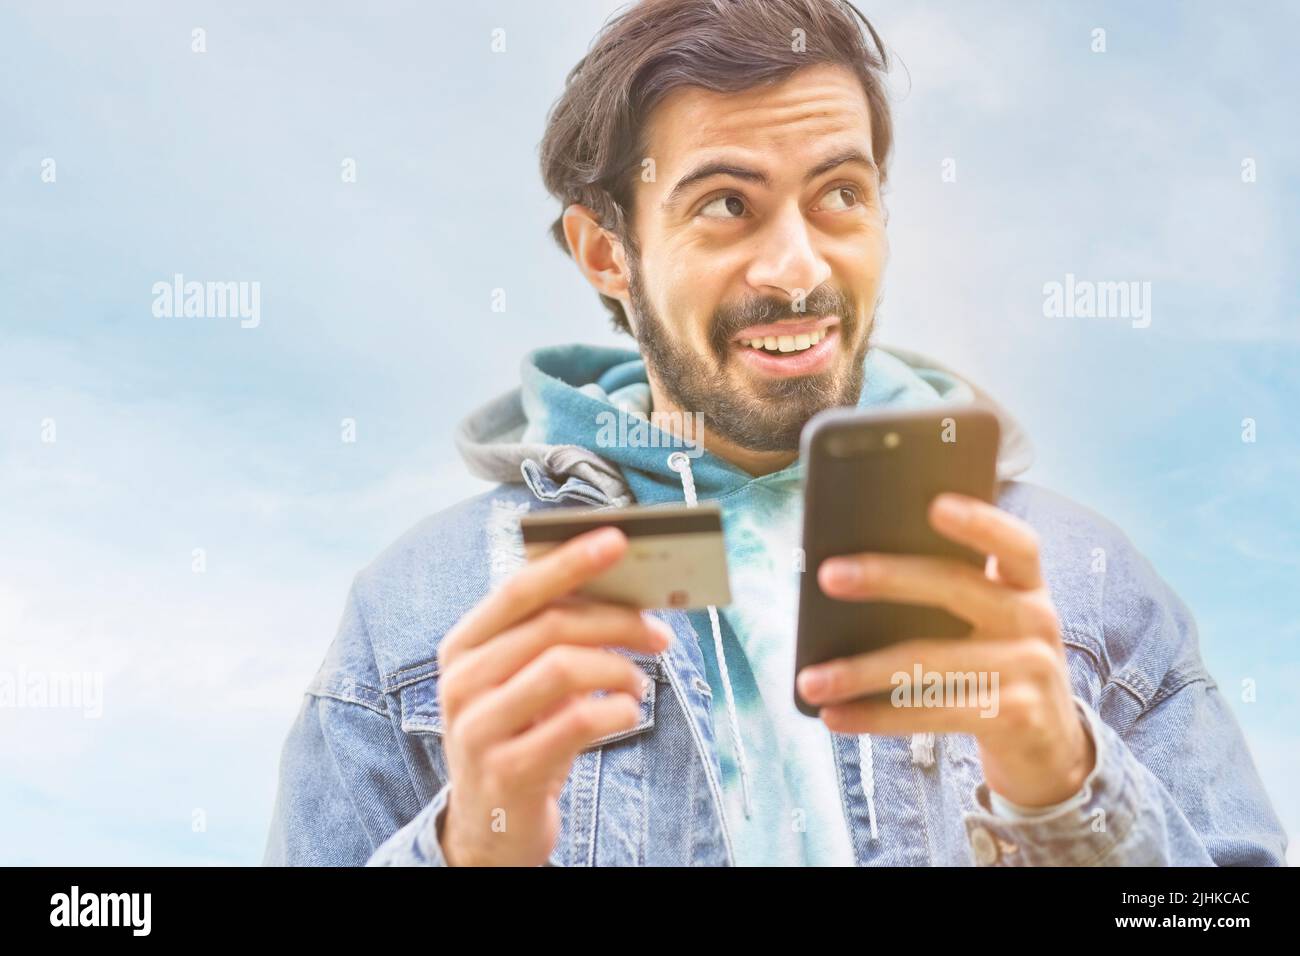 Latin man using credit card to make online payment on smartphone. Mixed race man using cellphone for shopping online. Guy using smart phone to check c Stock Photo